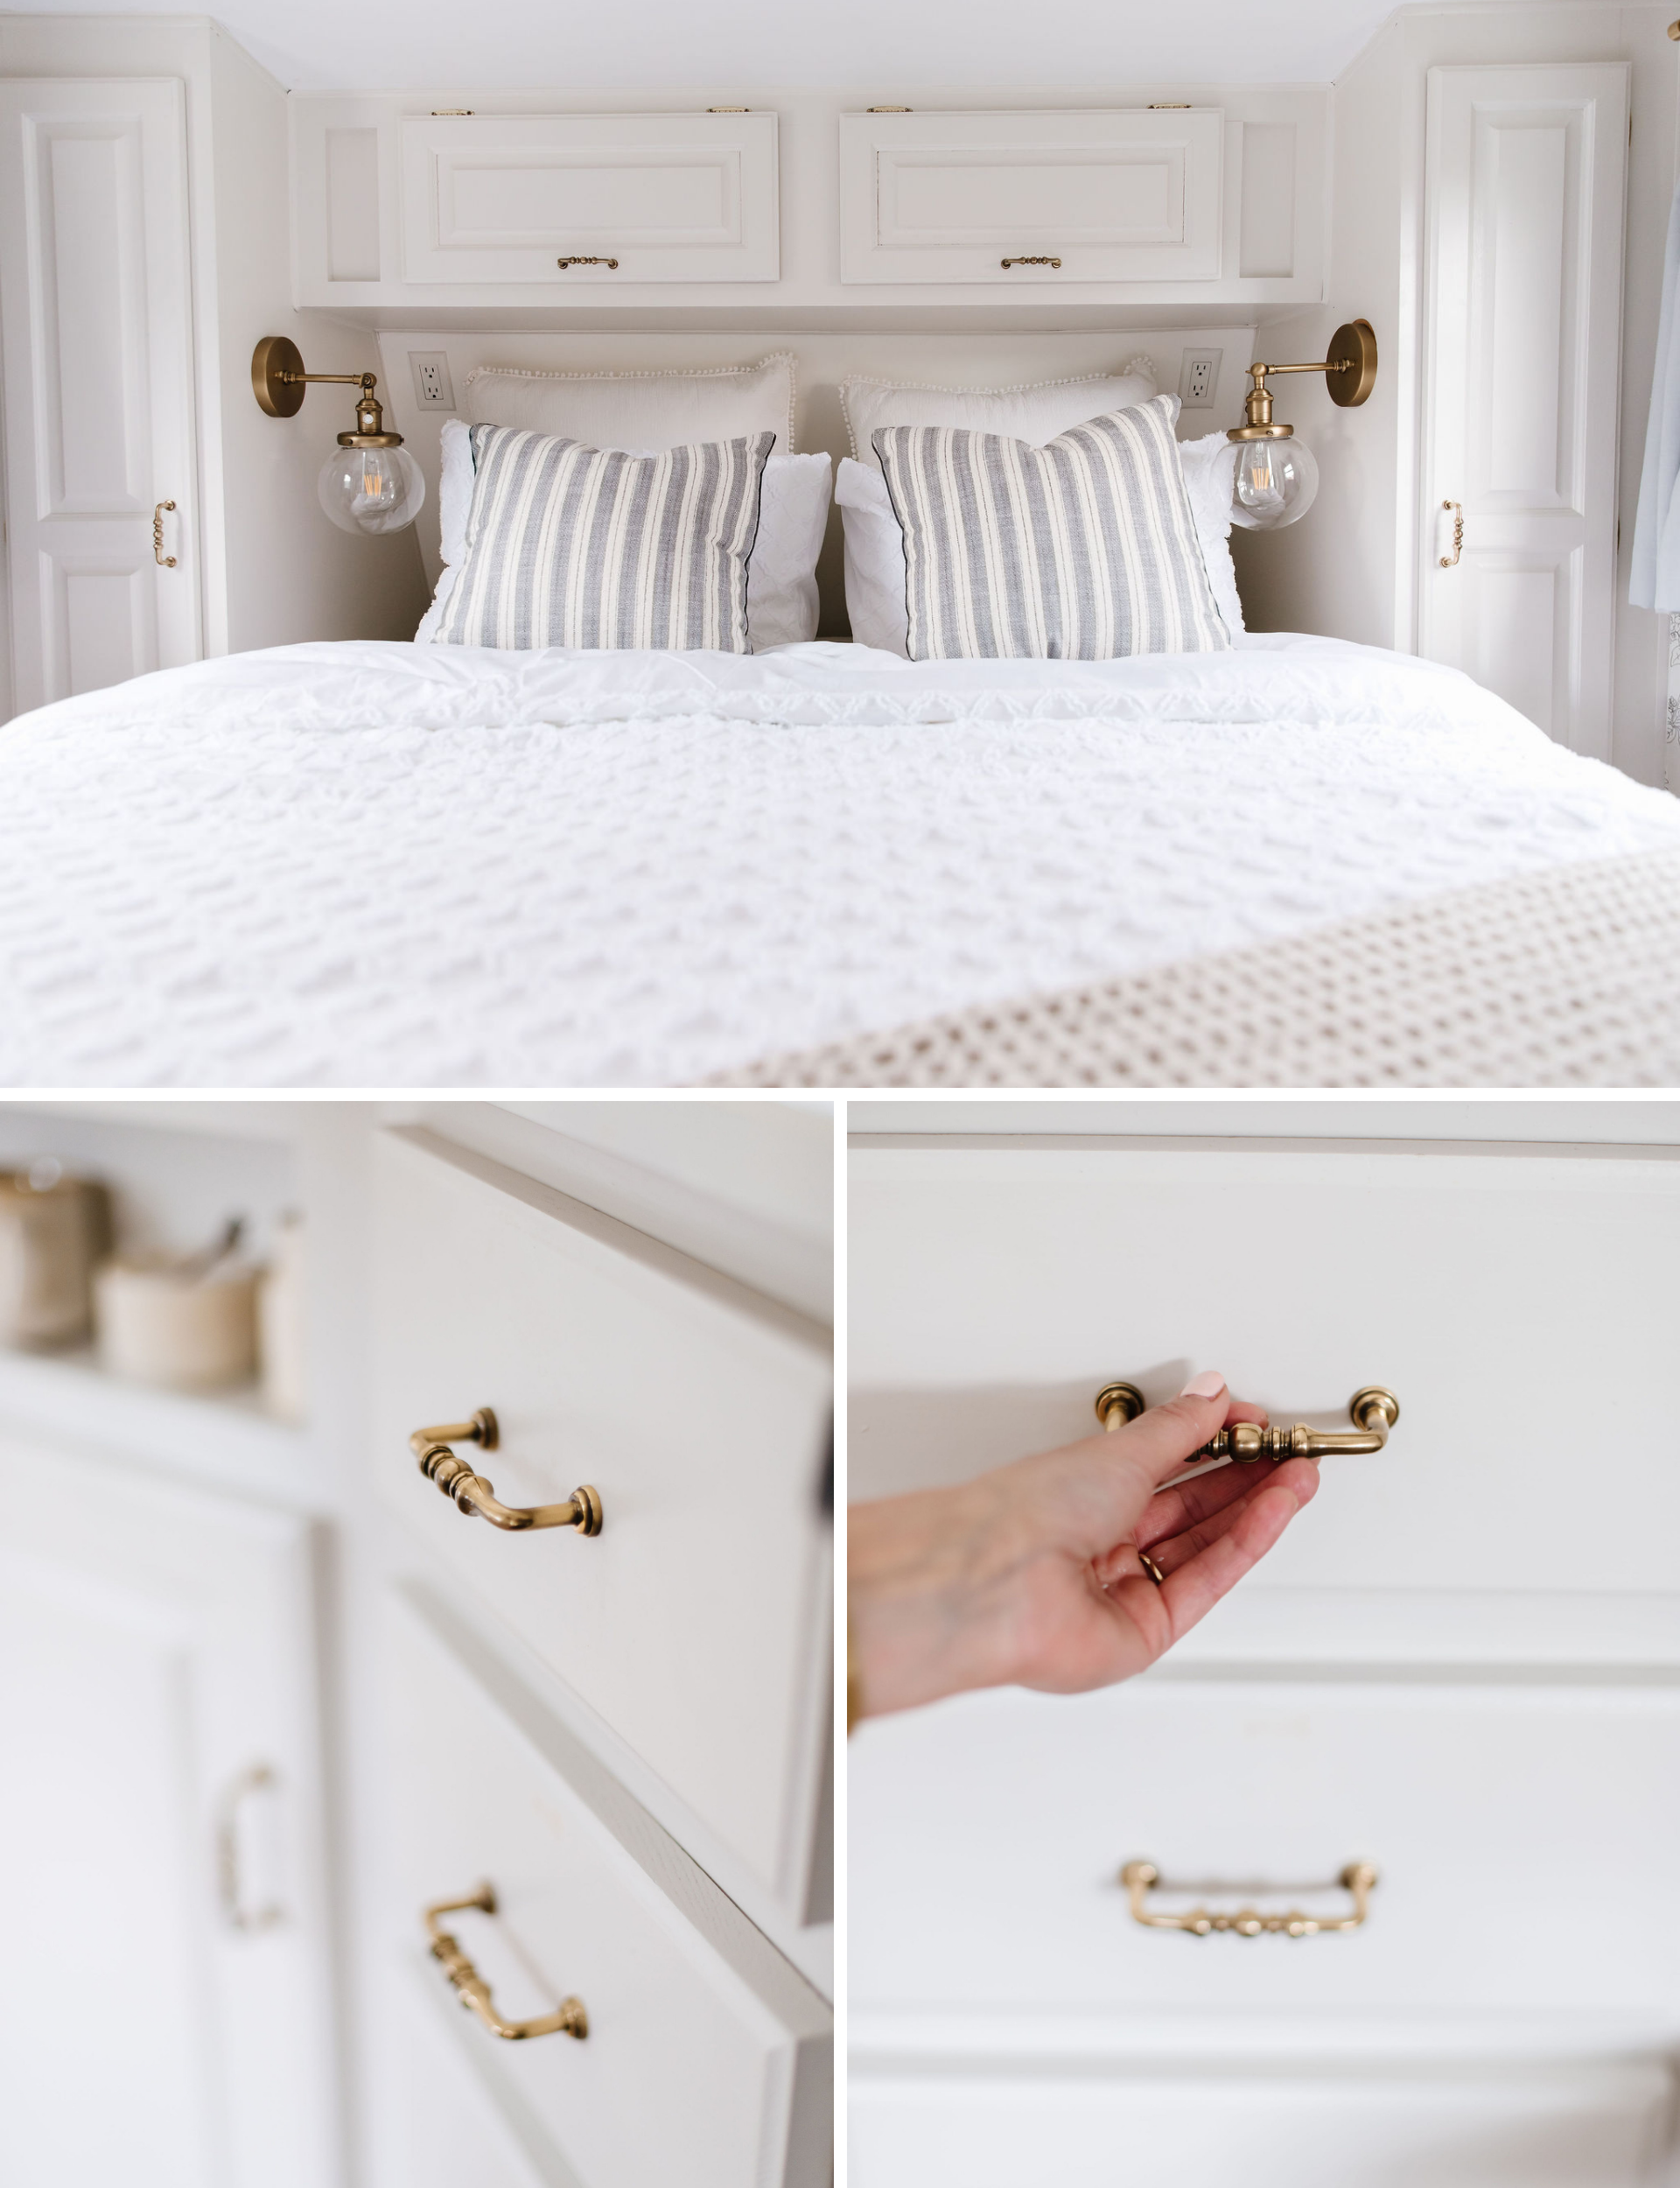 Our Camper Reveal Fraiche Living Brass hooks and hardware